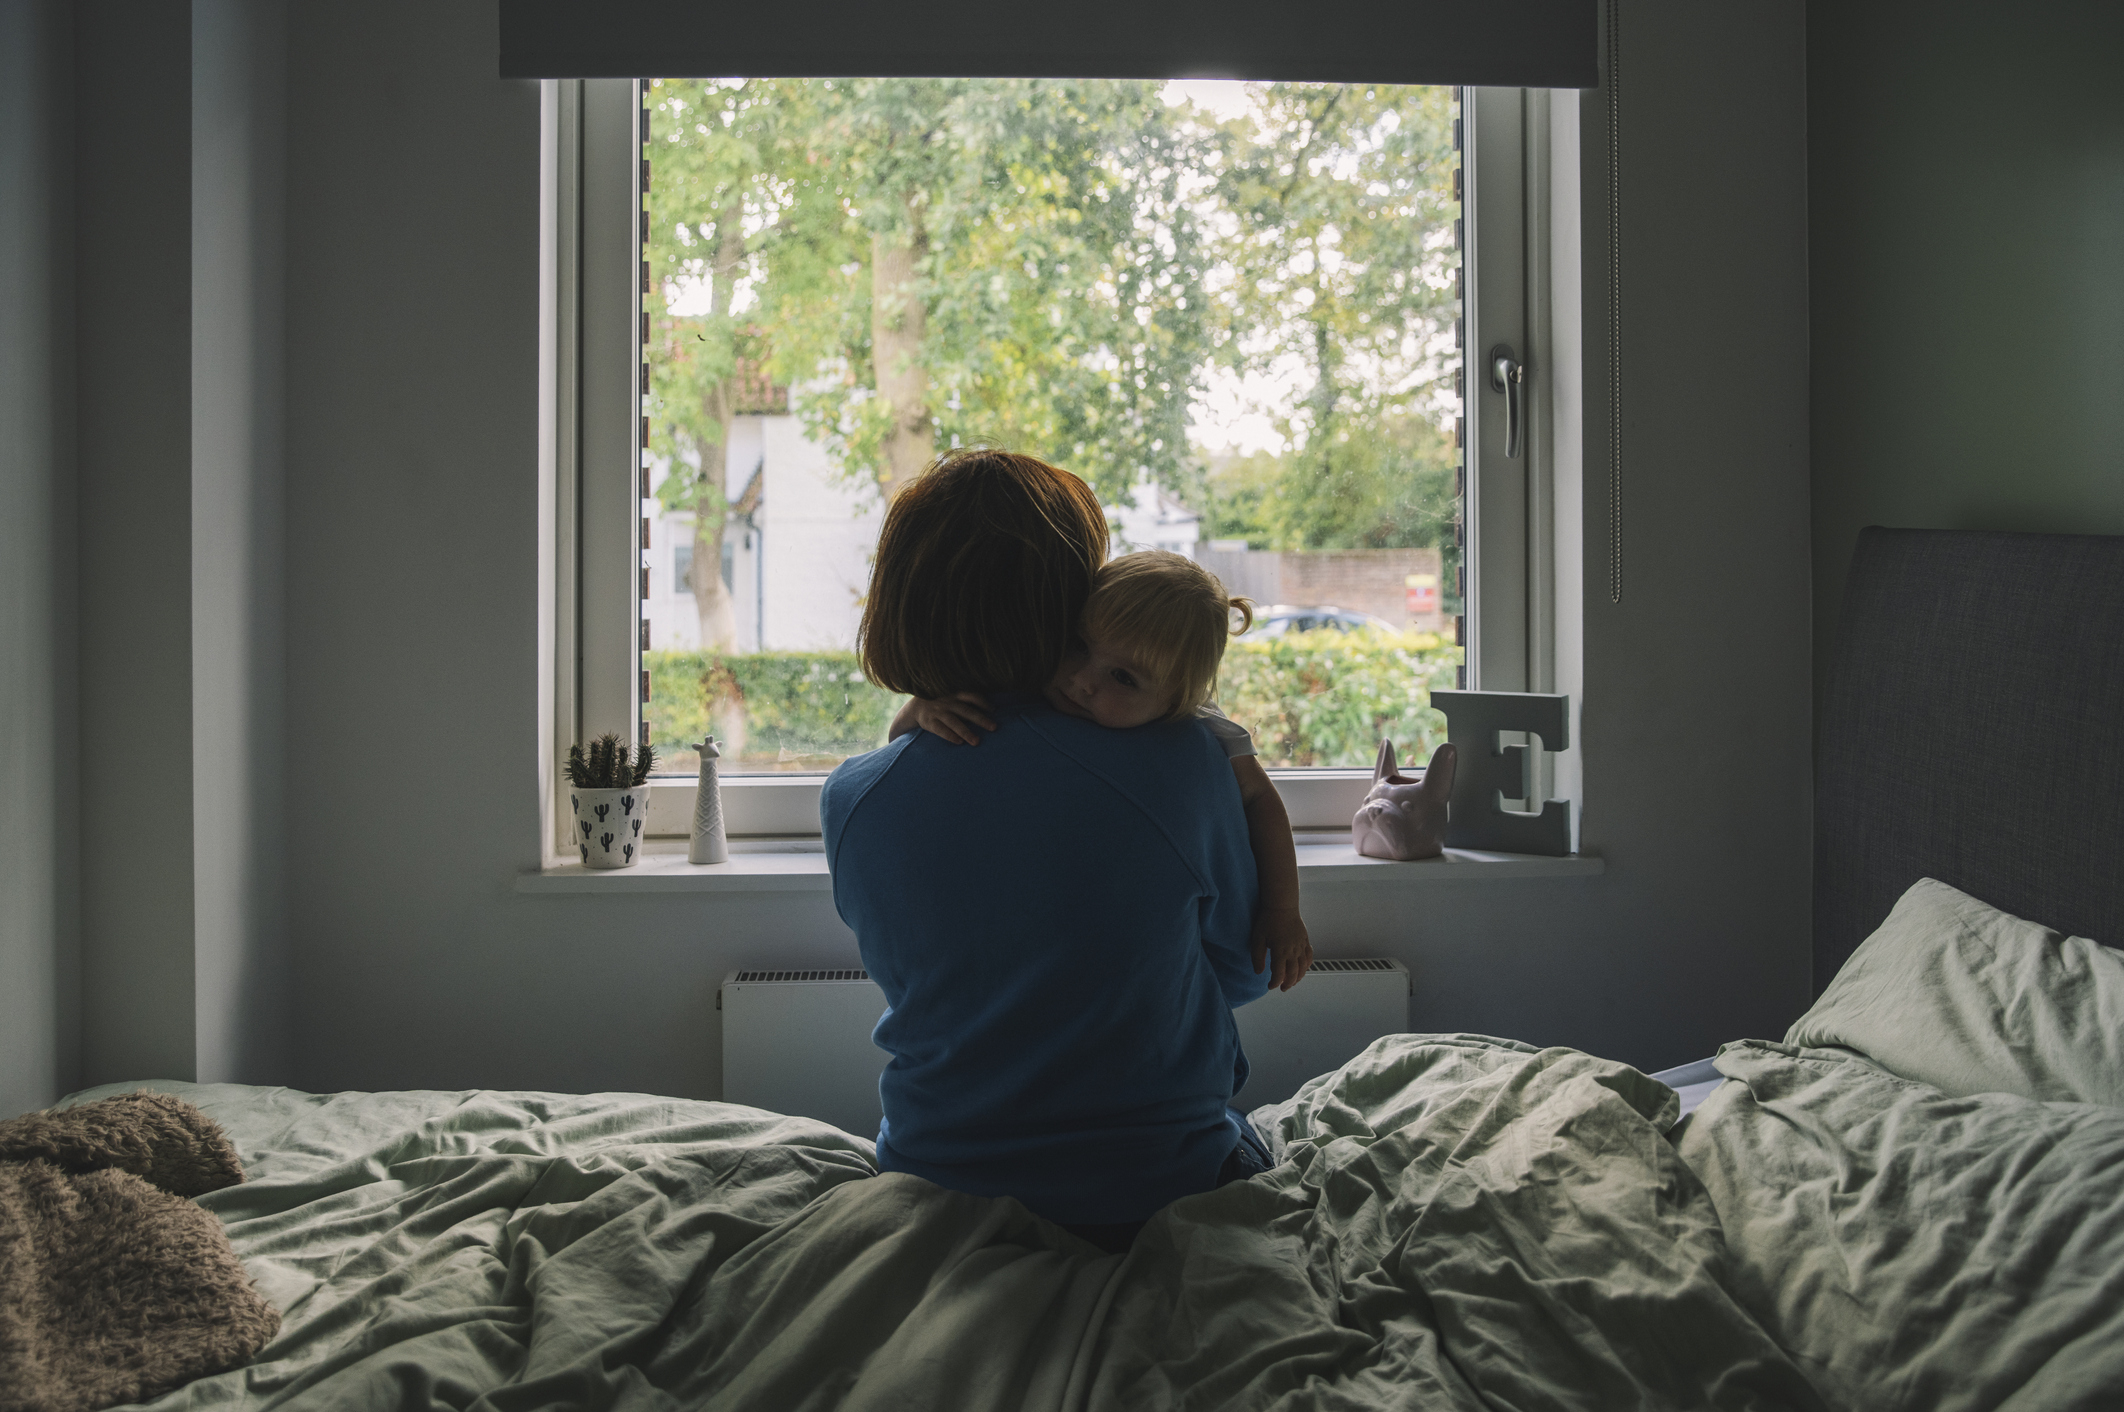 Mom and child embracing, looking out a window from a bed, in a dim bedroom